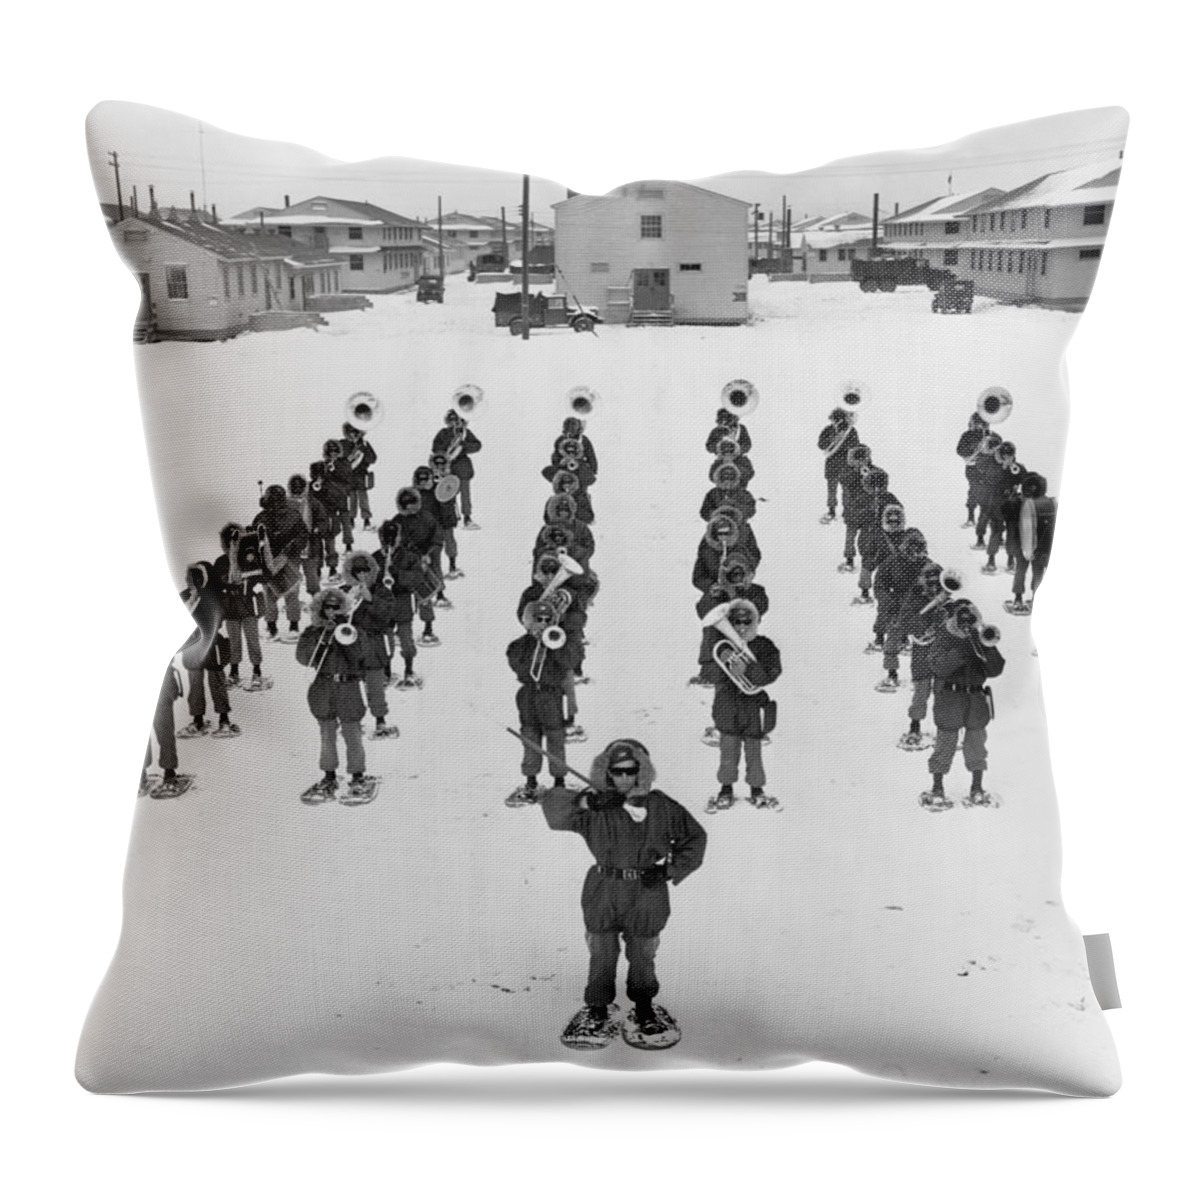 1953 Throw Pillow featuring the photograph Military Band, 1953 by Granger